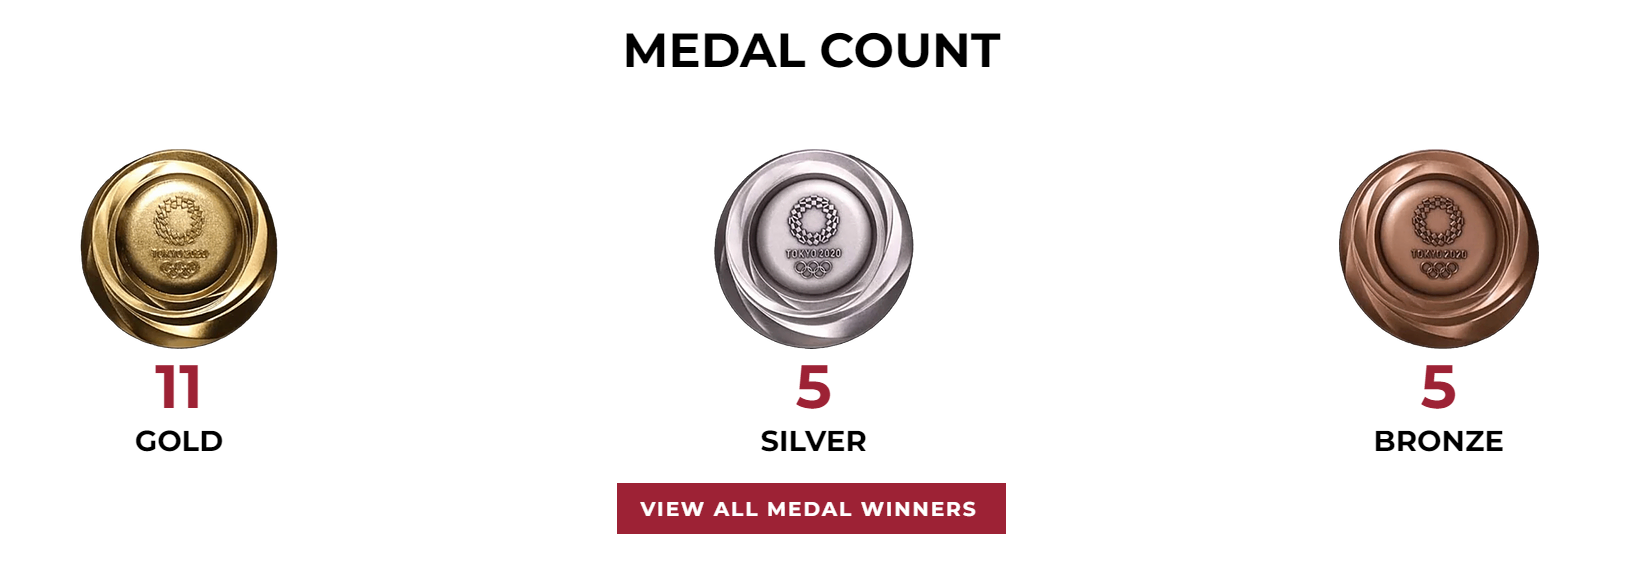 USC Medal Count